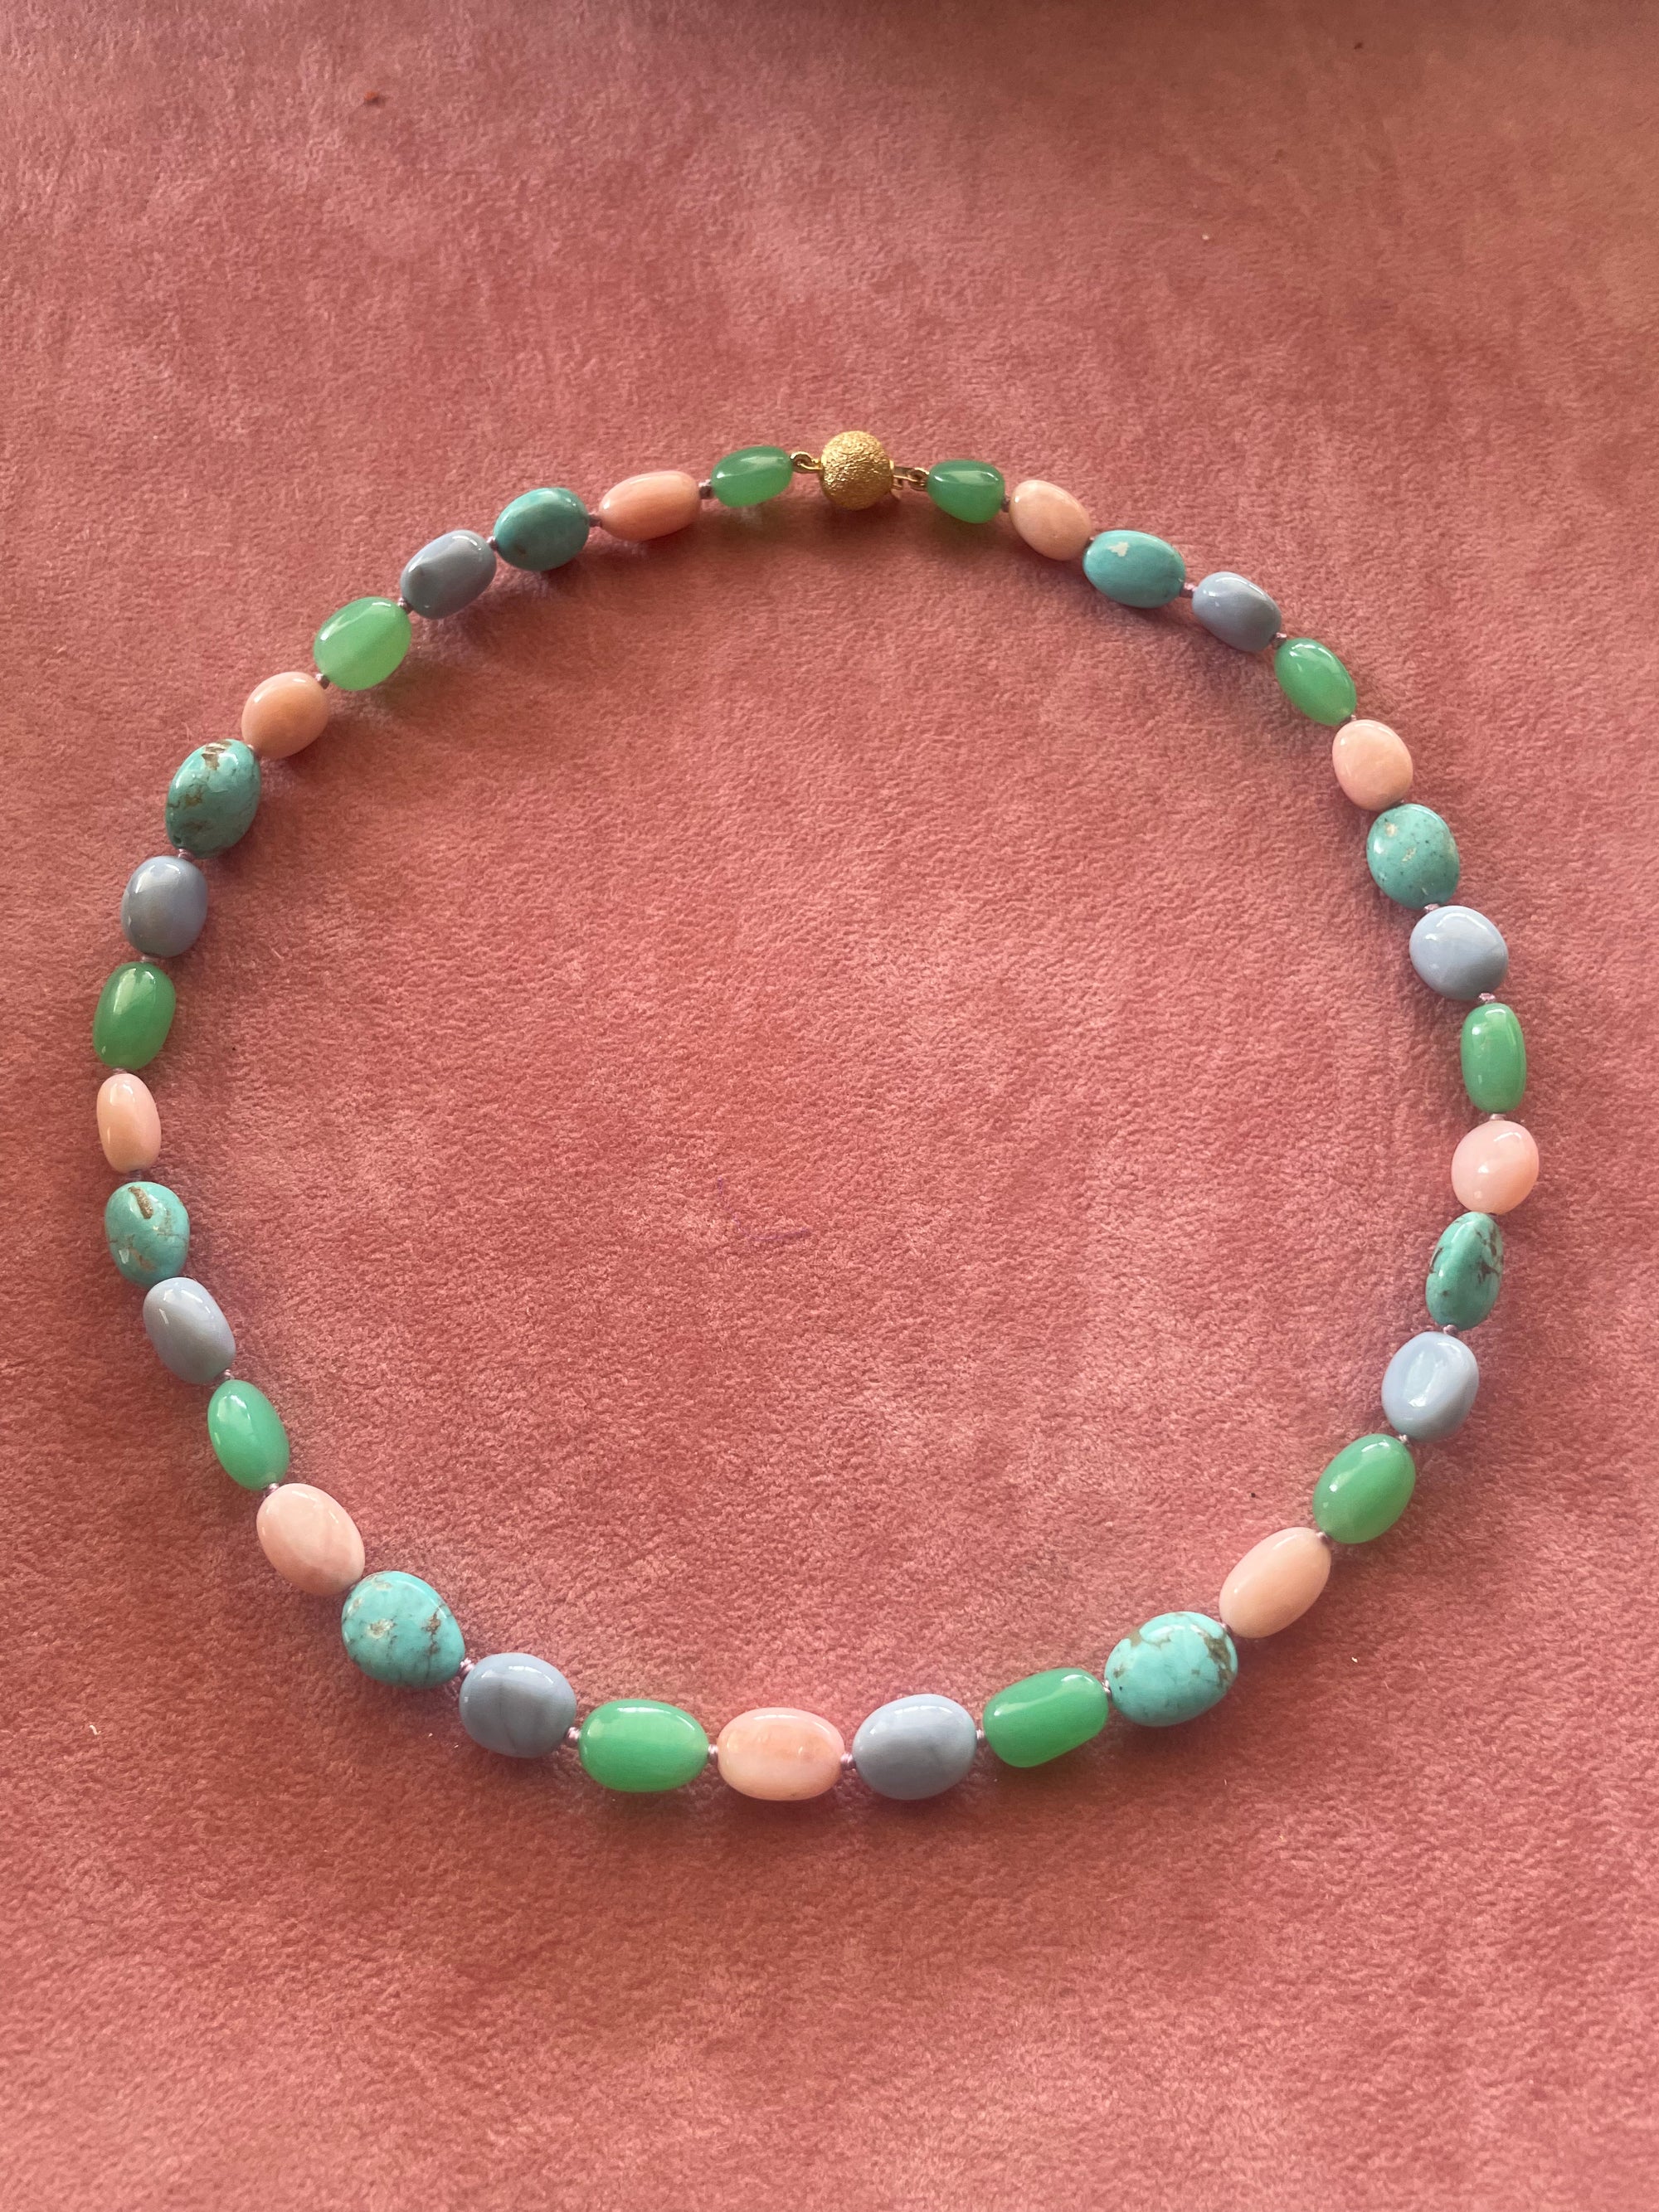 Beaded Nuggets Pink Opal, Turquoise, Chalcedony and Chrysoprase Necklace